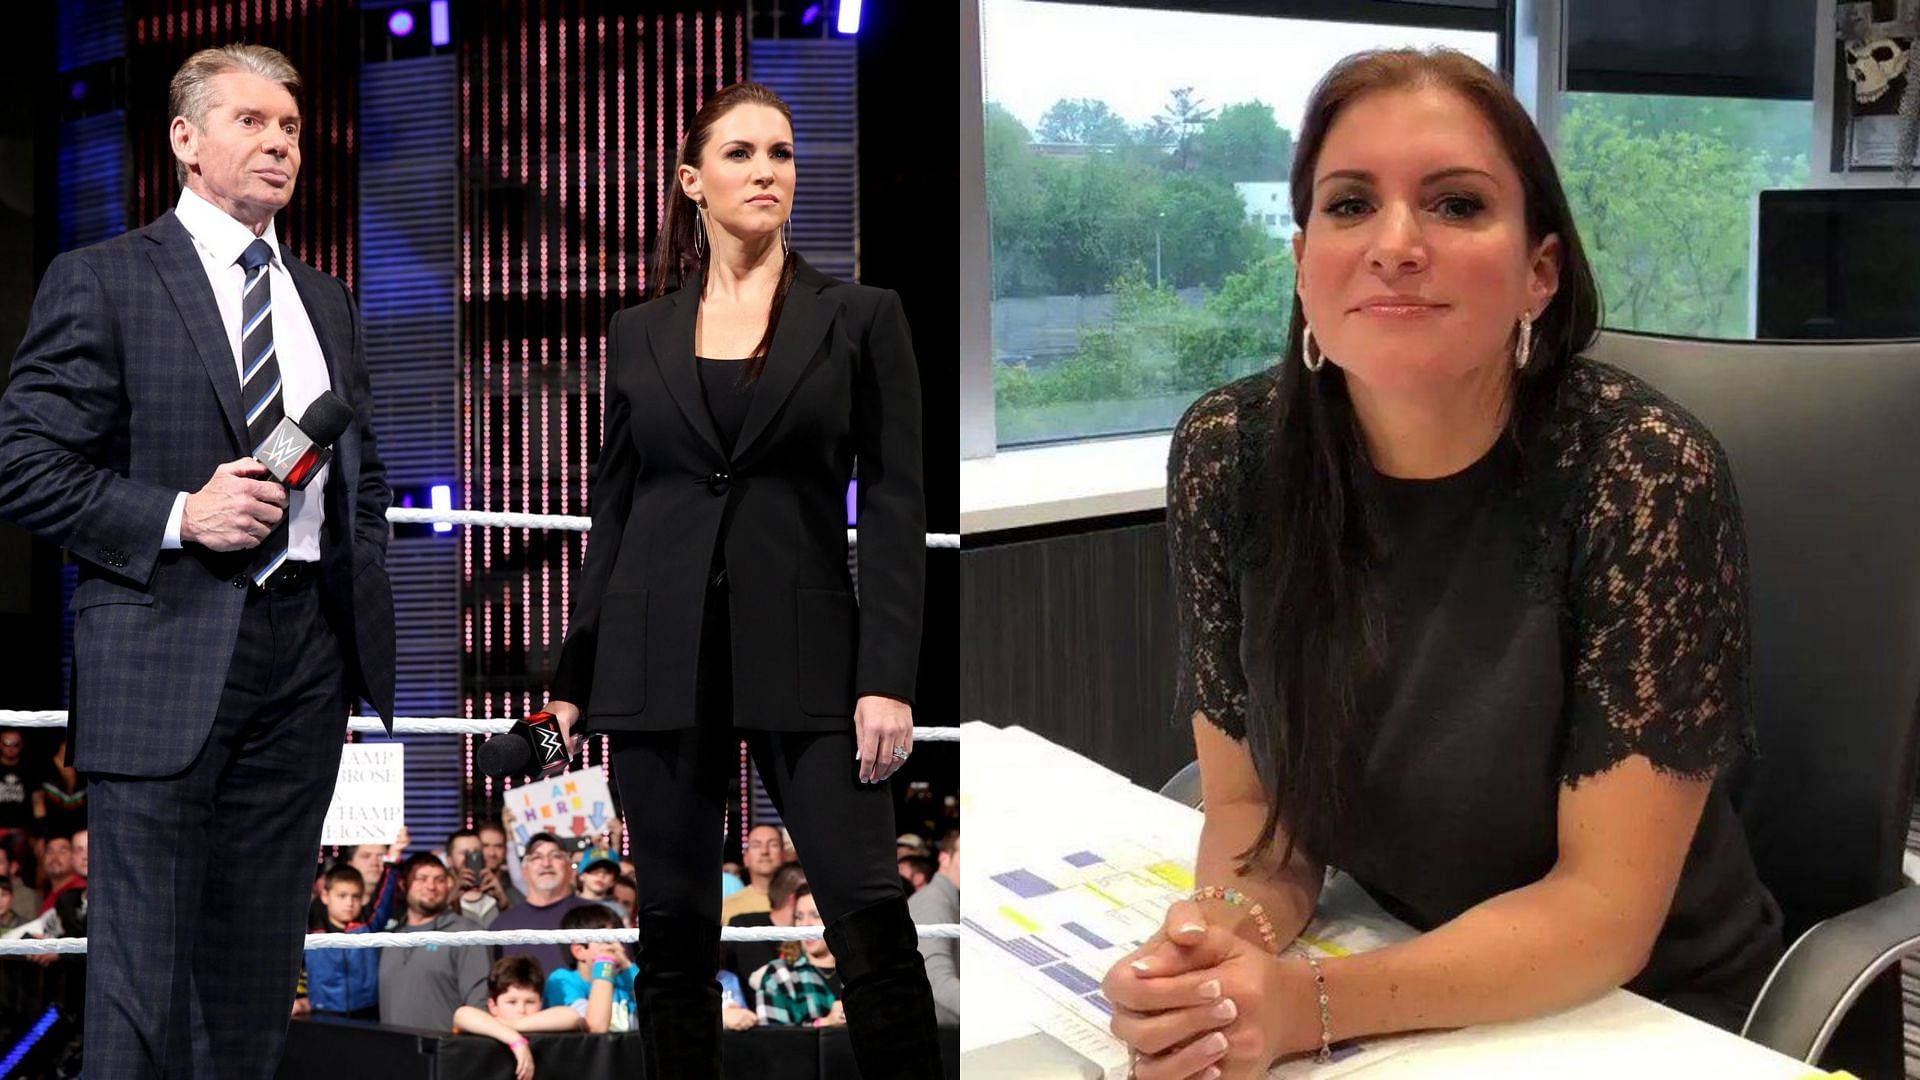 Stephanie McMahon is the new interim CEO and Chairwoman of WWE